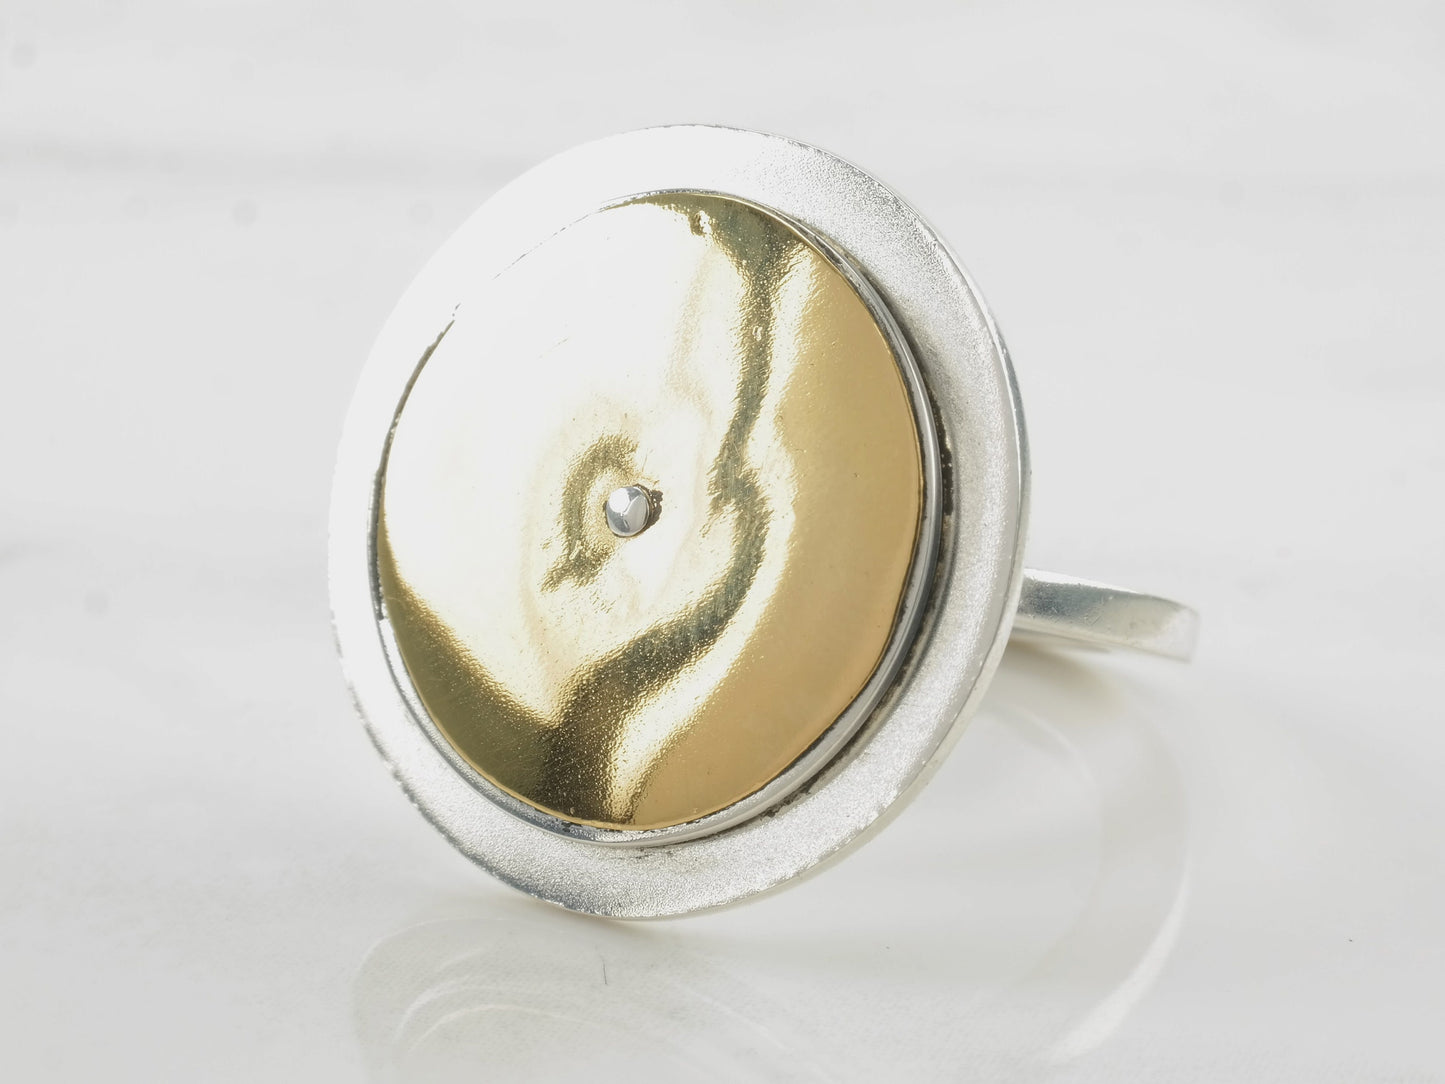 Vintage Modernist Ring Two Tone Disc Spinnable Sterling Silver Gold Tone Size 5 1/2